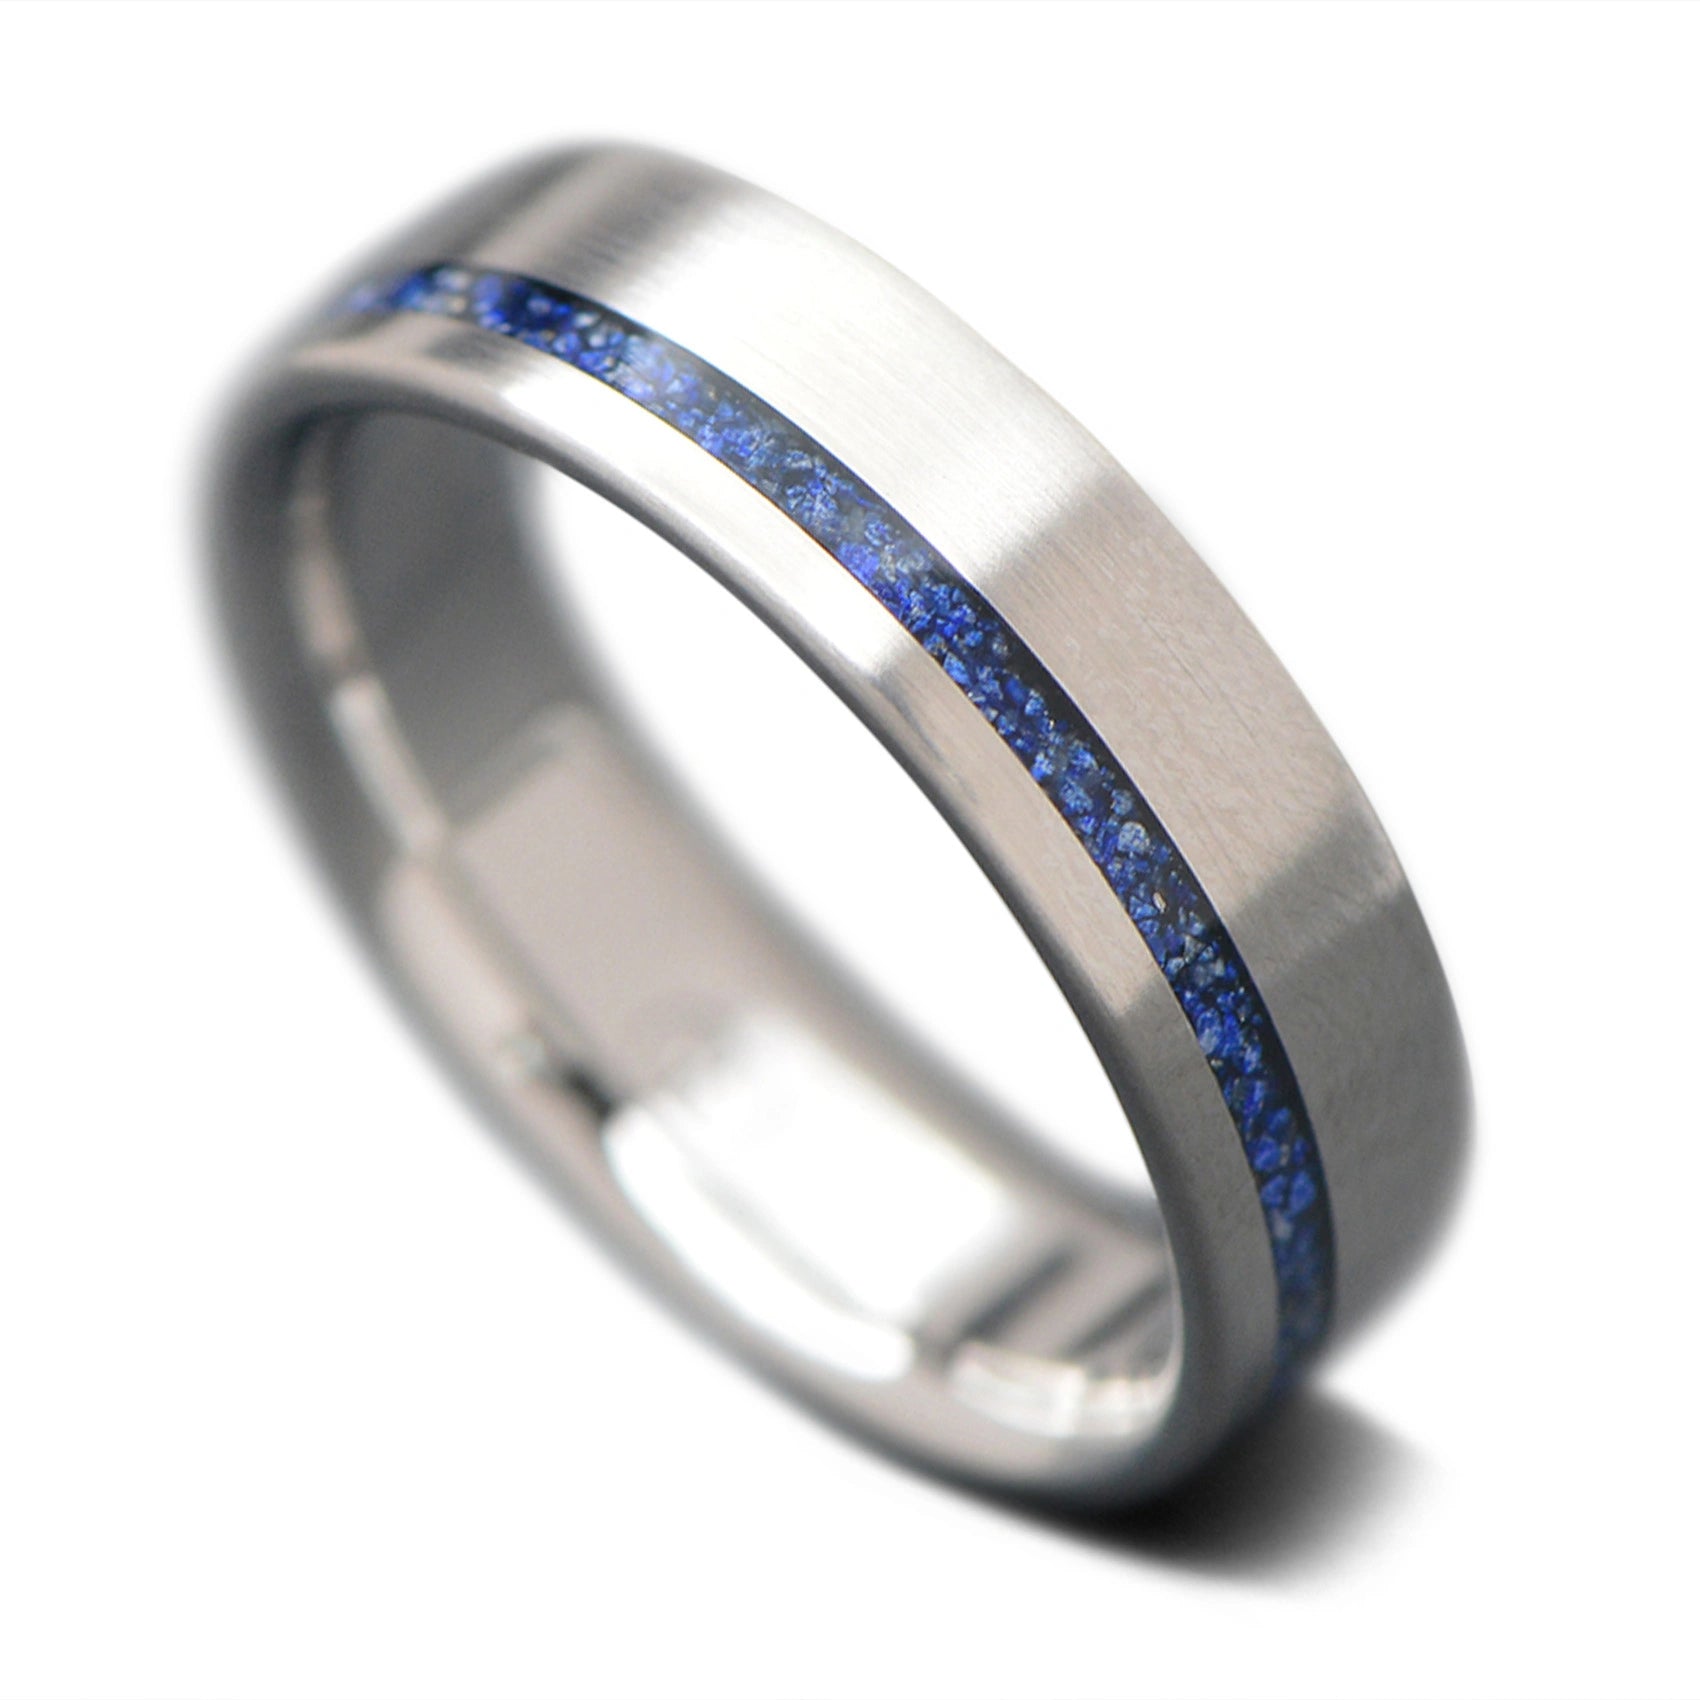 Titanium Core Ring with Lapis Lazuli inlay, 6mm -THE SHIFT